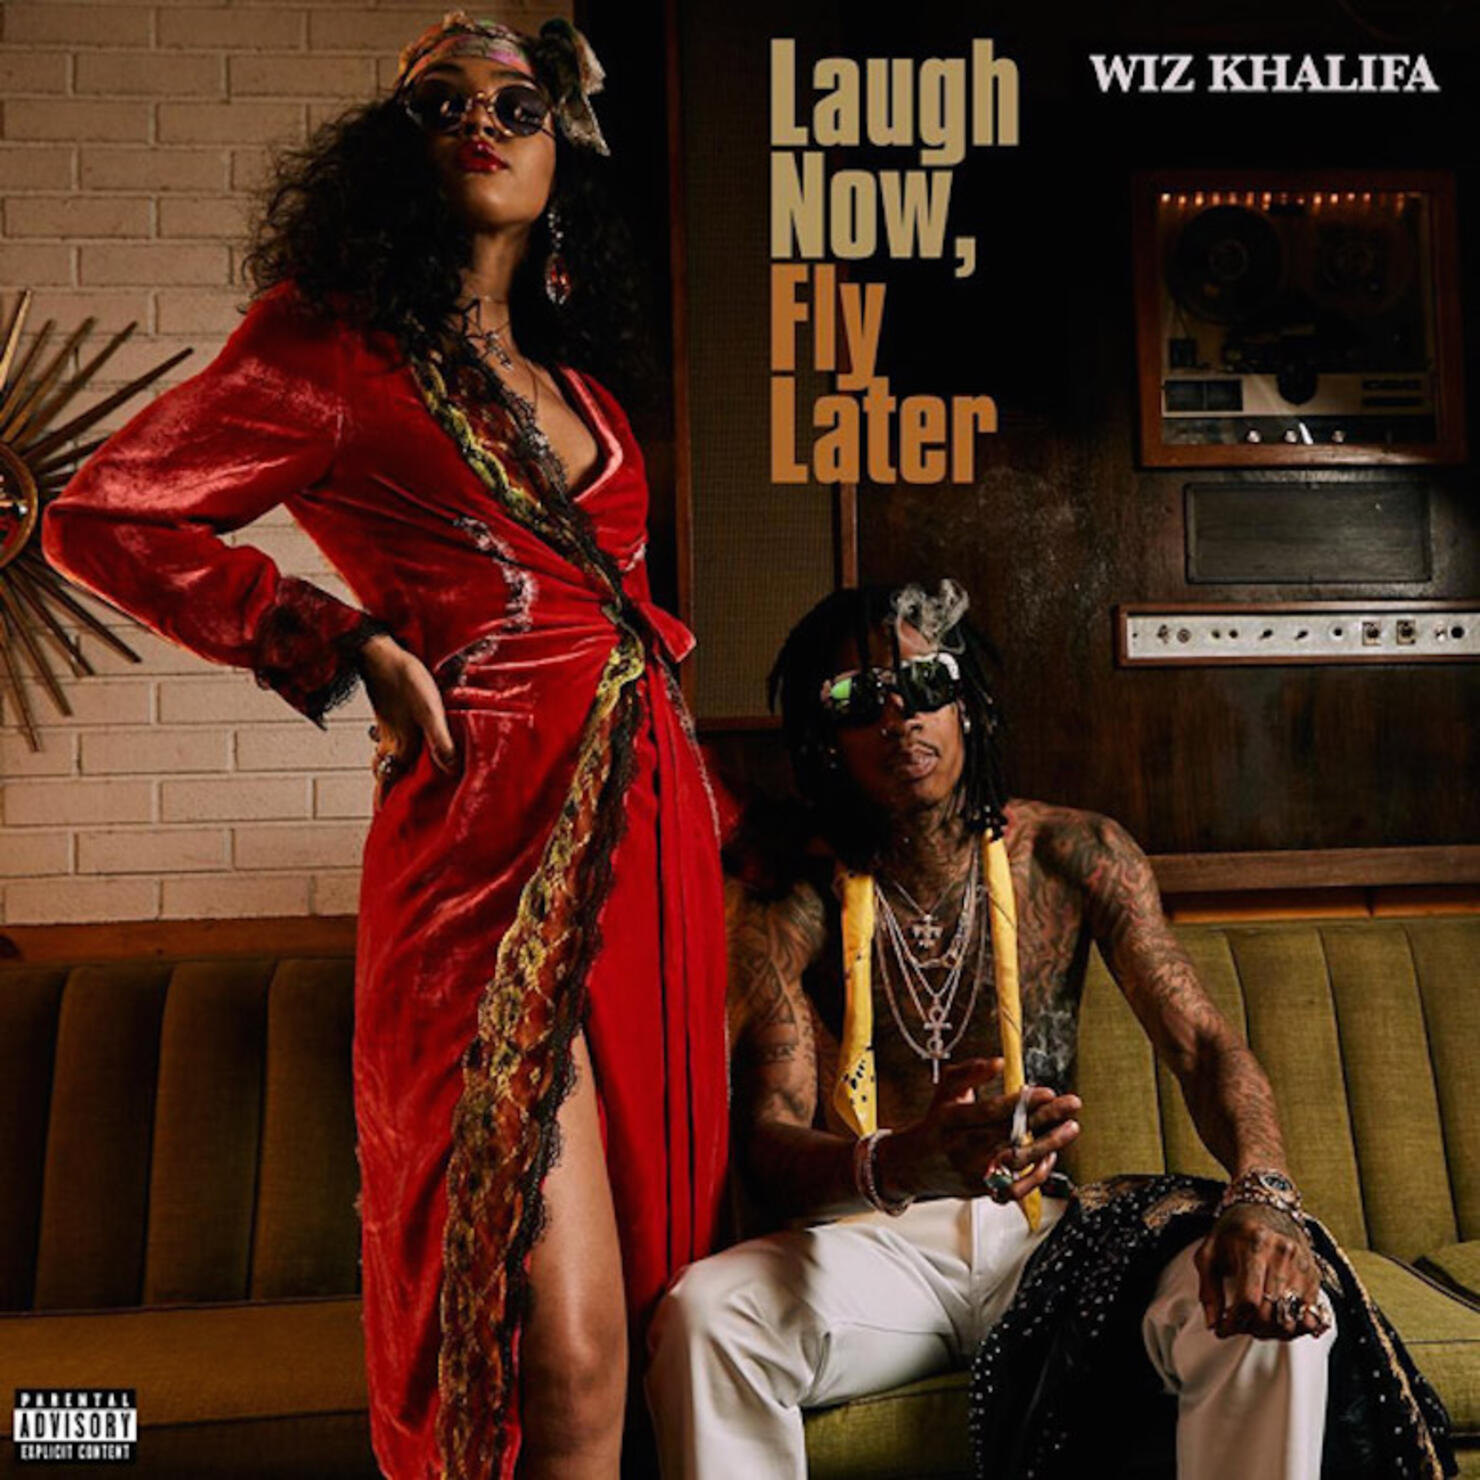 Wiz Khalifa - 'Laugh Now, Fly Later'